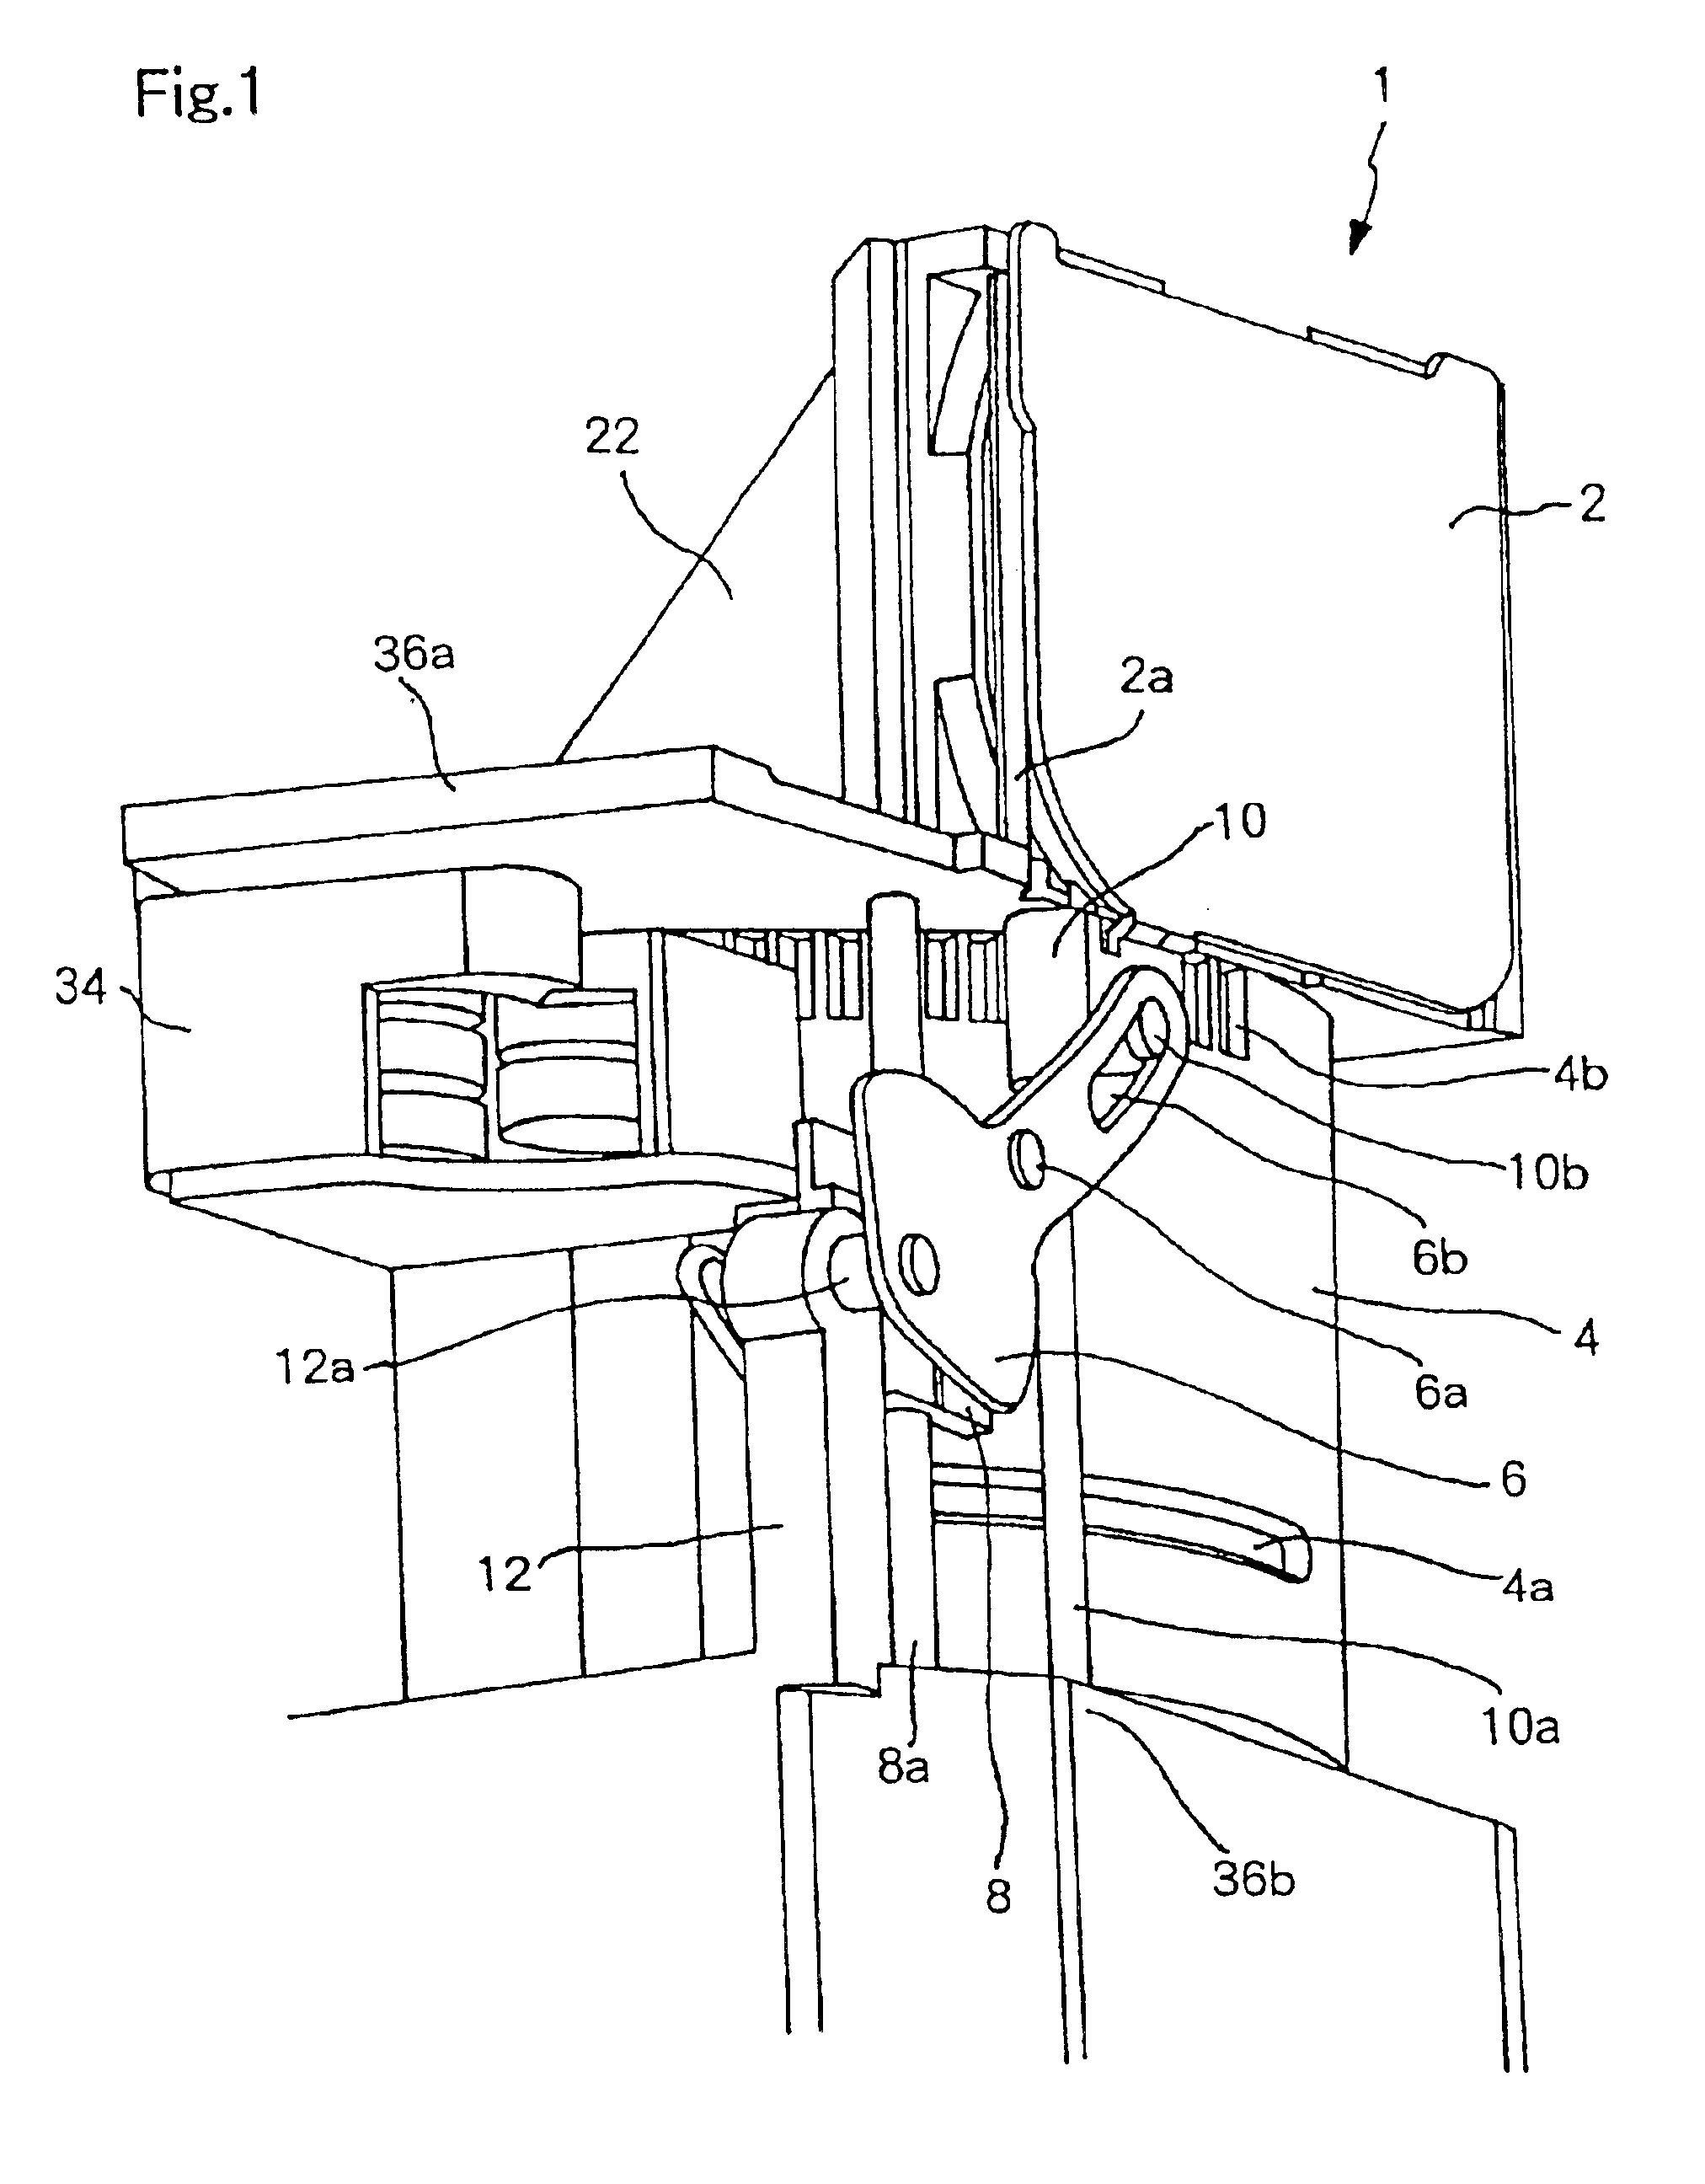 Barrier opening and closing mechanism